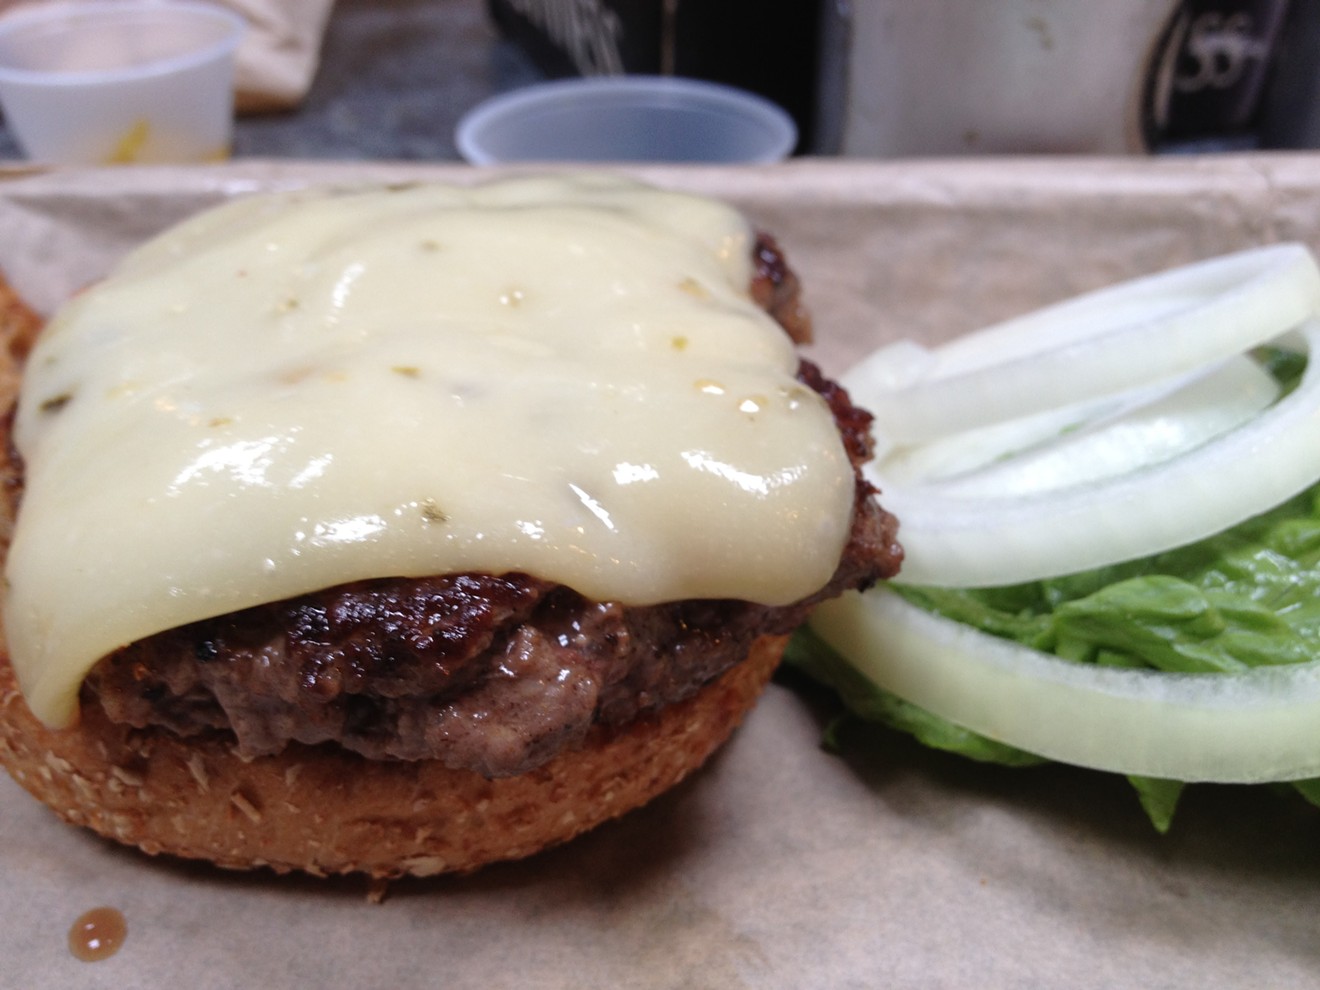 In 2012, Twisted Root ground beaver meat into burgers for a limited time.